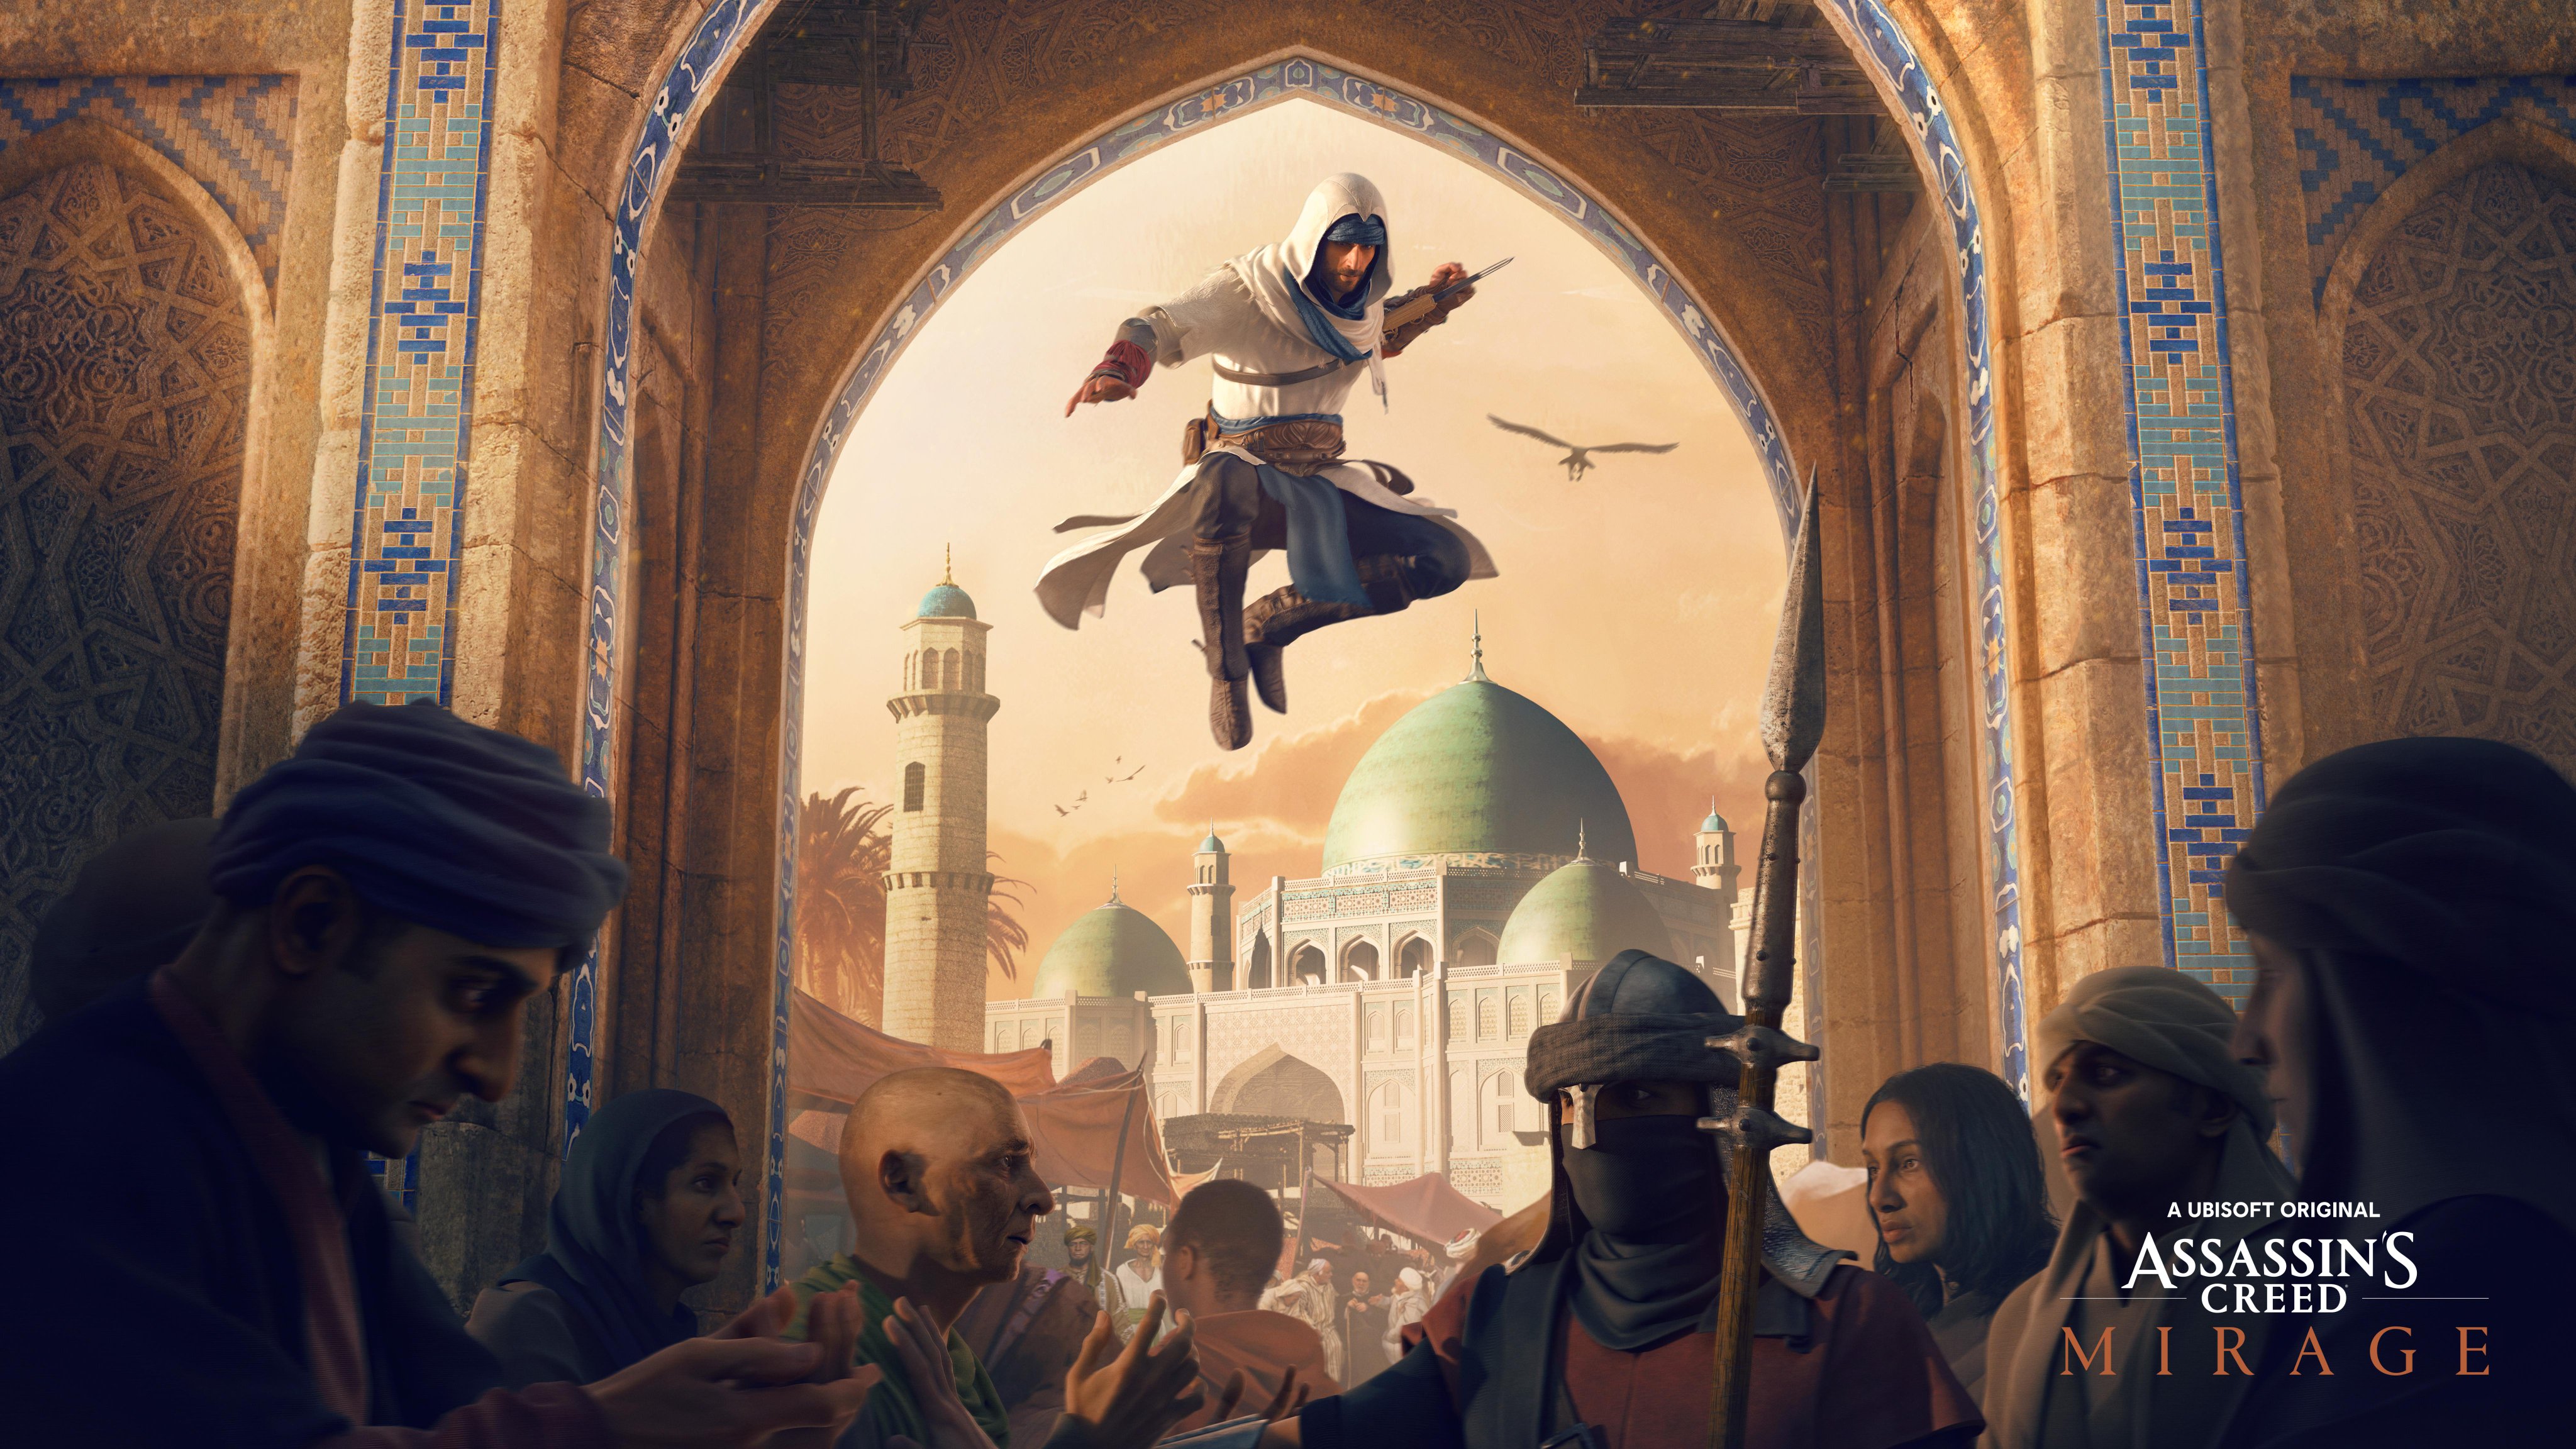 Assassin’s Creed next game confirmed as Valhalla spin-off Mirage: the image from Ubisoft's Twitter confirming Assassin's Creed Mirage